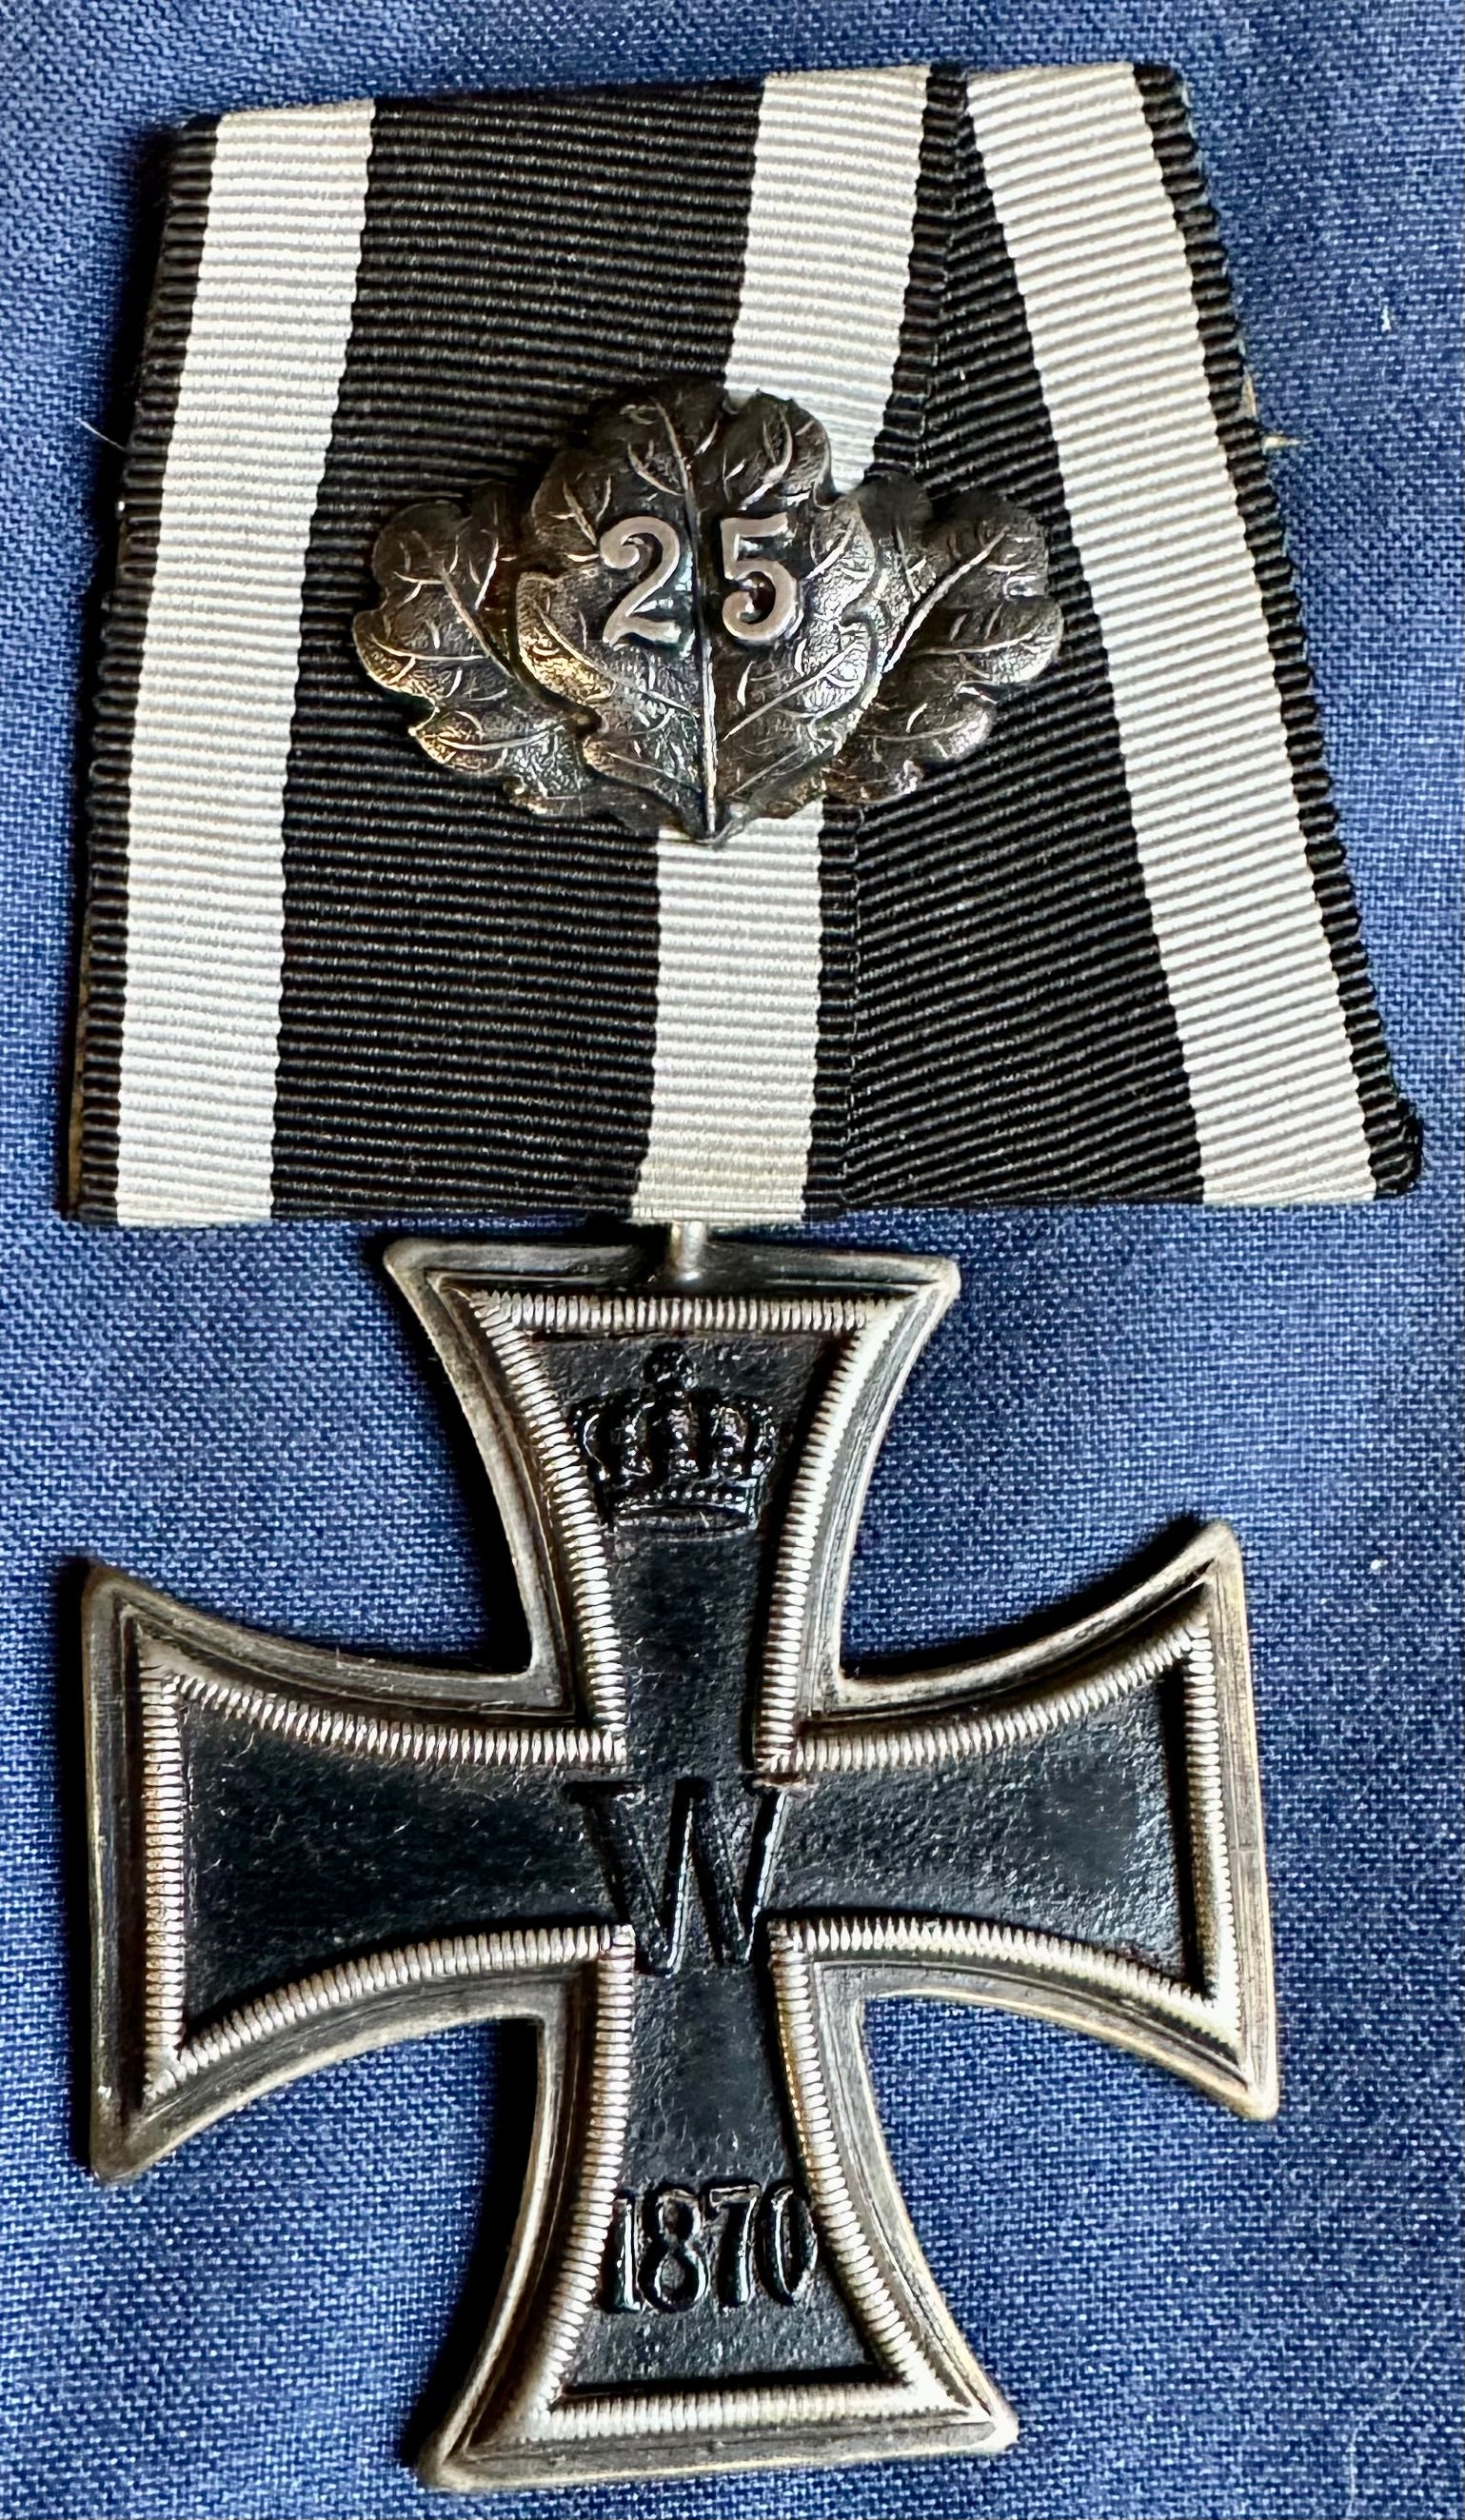 German Iron Cross 1870 2nd class with 25 year oak leaves - Derrittmeister Militaria Group